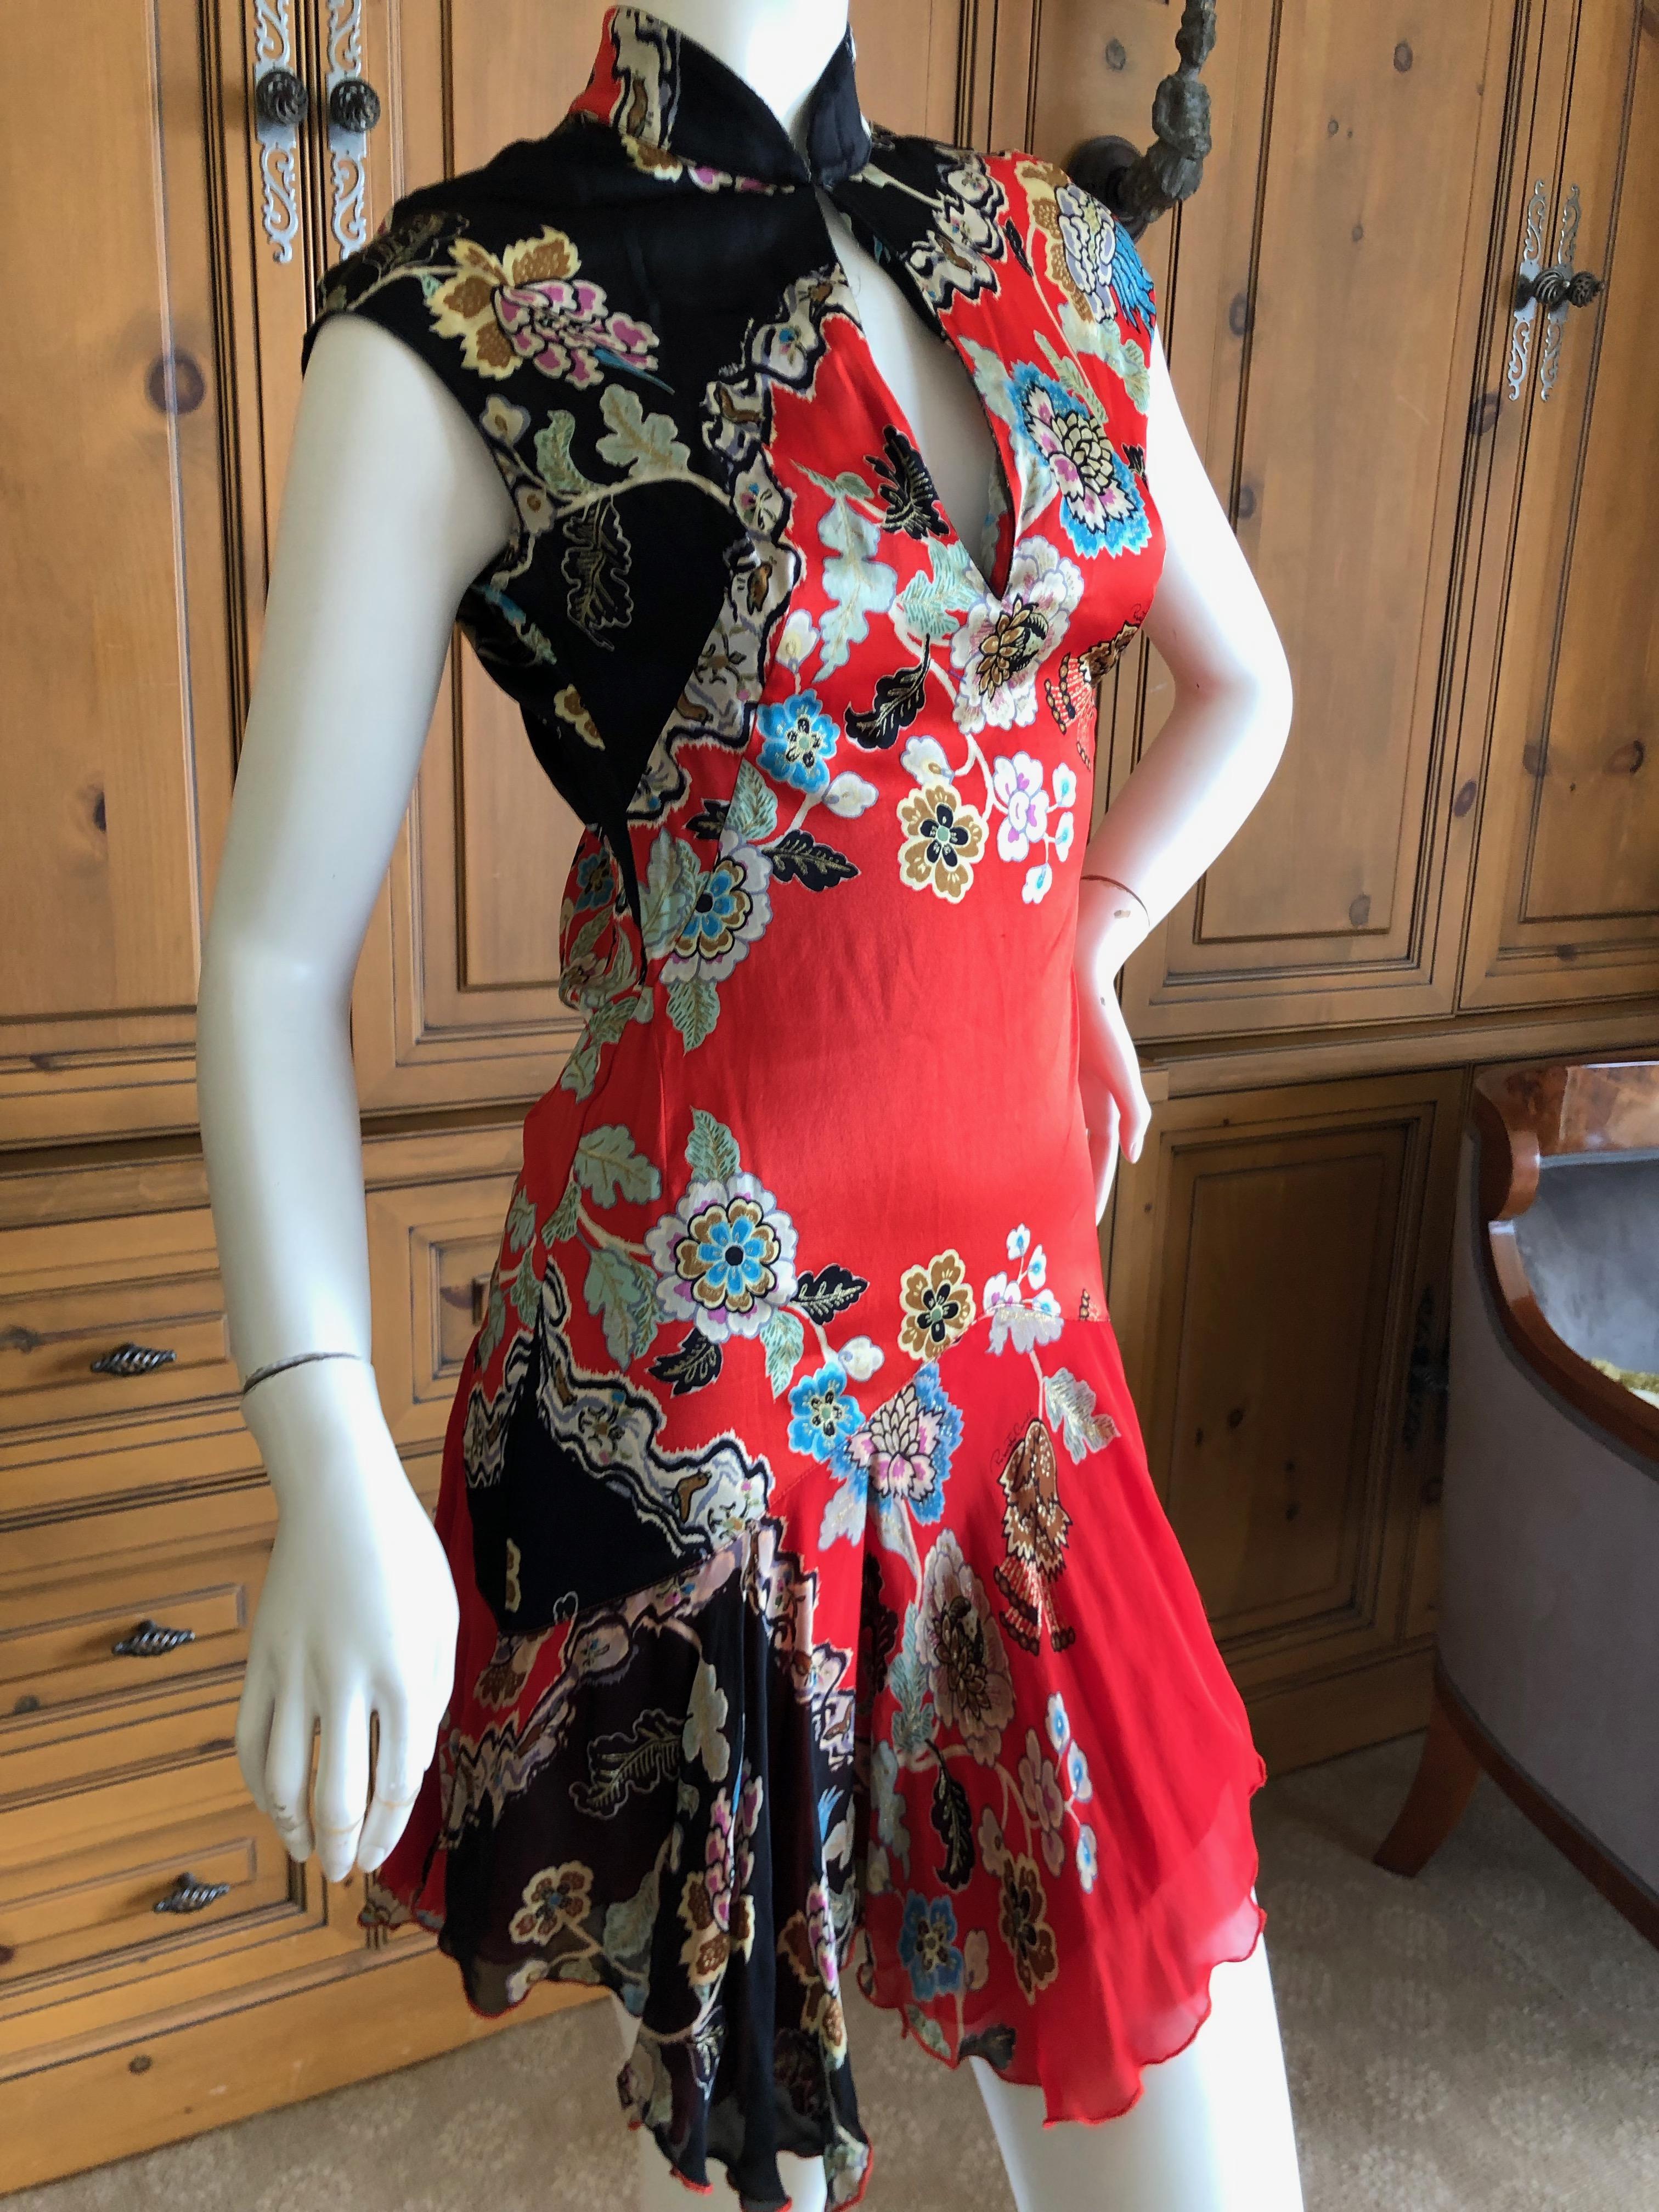 Roberto Cavalli Spring 2003 Silk Cheongsam Style High Collar Floral Dress  In Good Condition For Sale In Cloverdale, CA